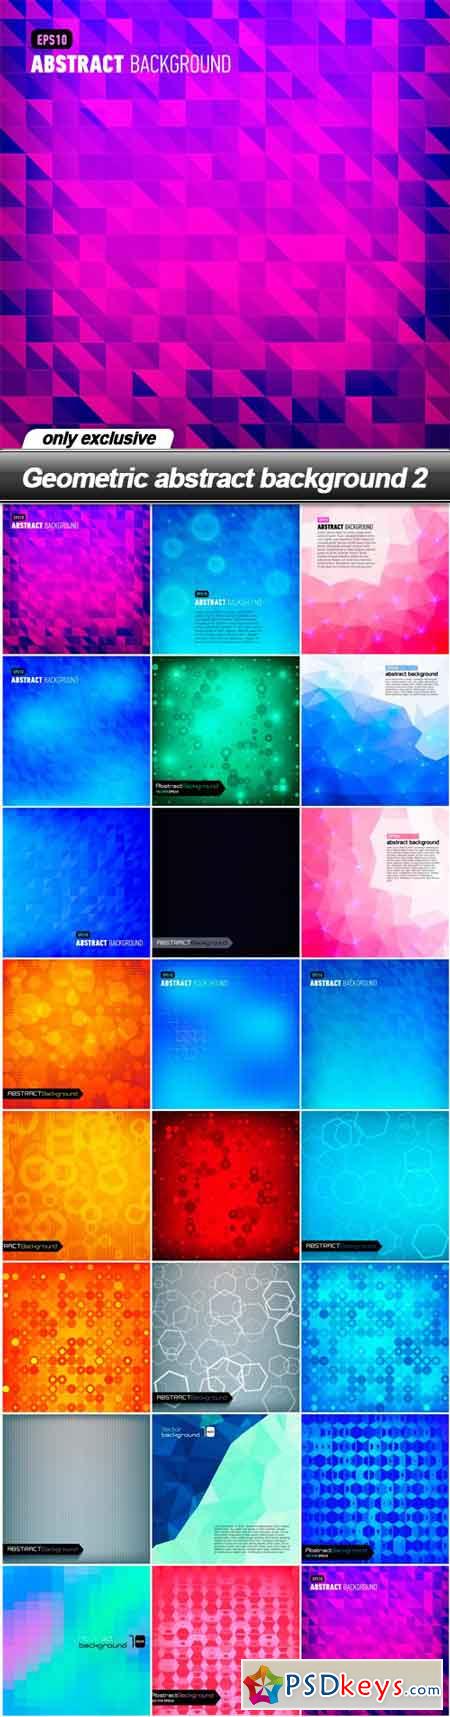 Geometric abstract background 2 - 23 EPS